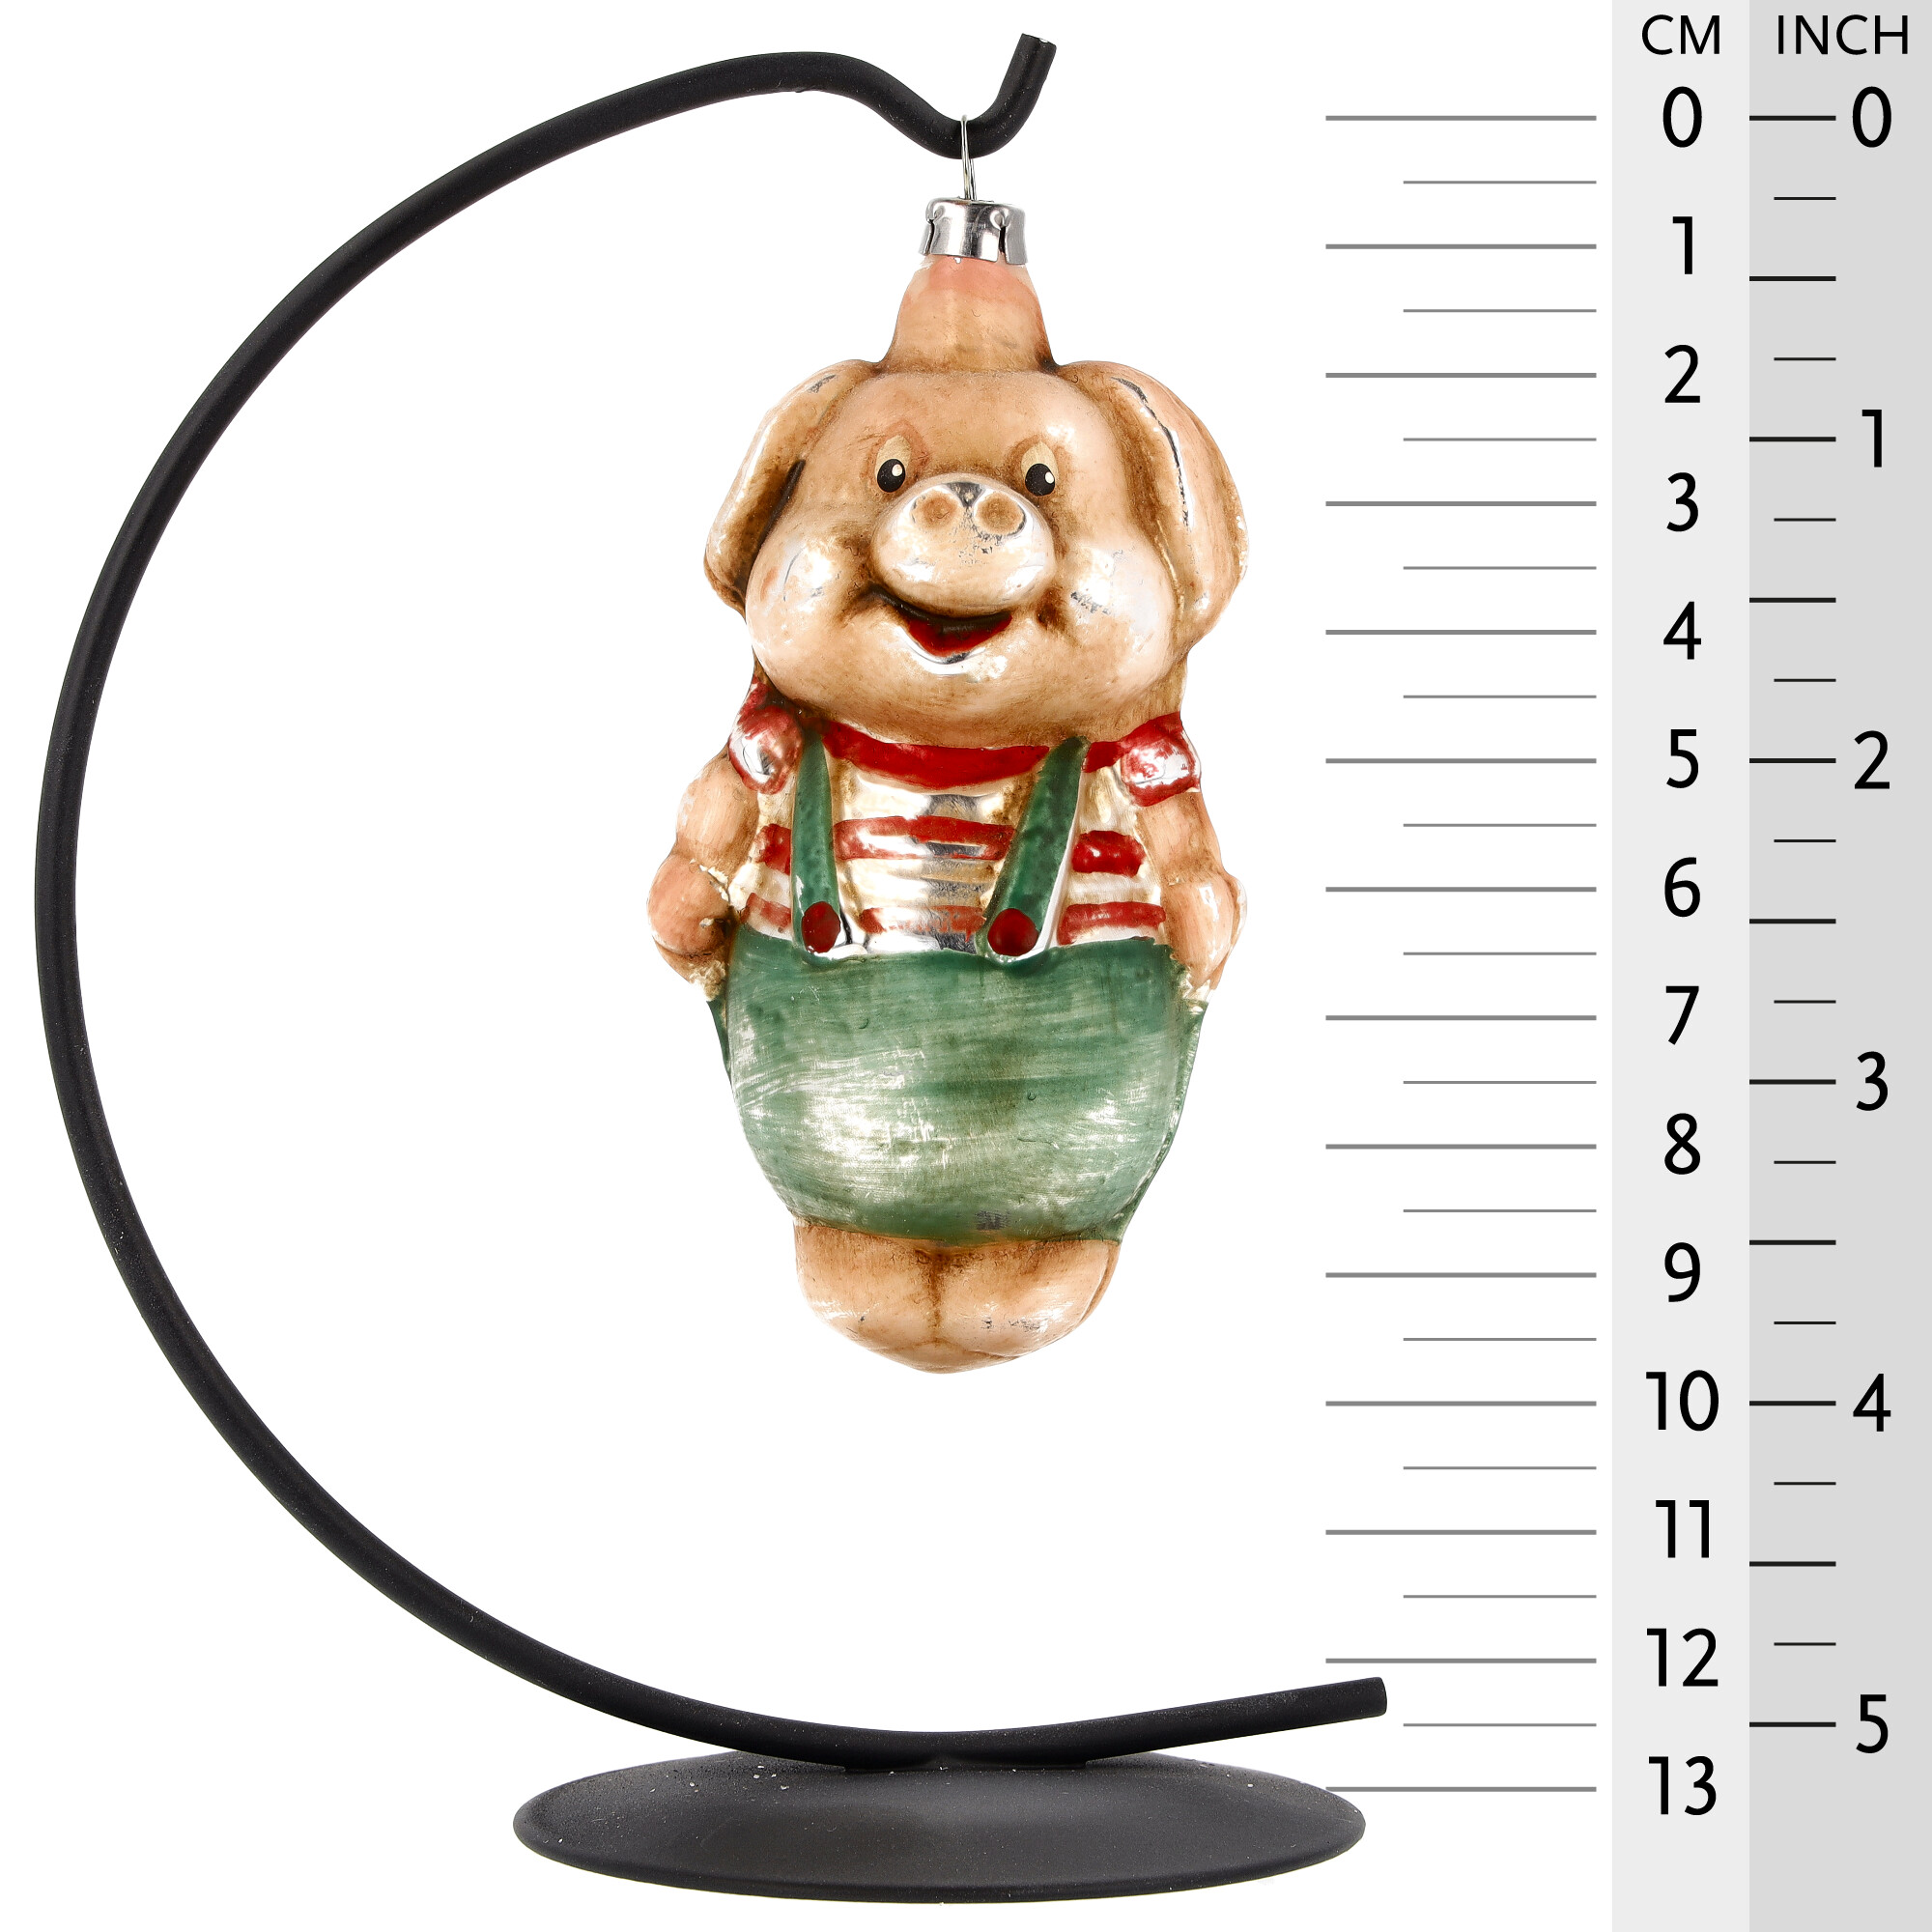 Retro Vintage style Christmas Glass Ornament - Pig with trousers